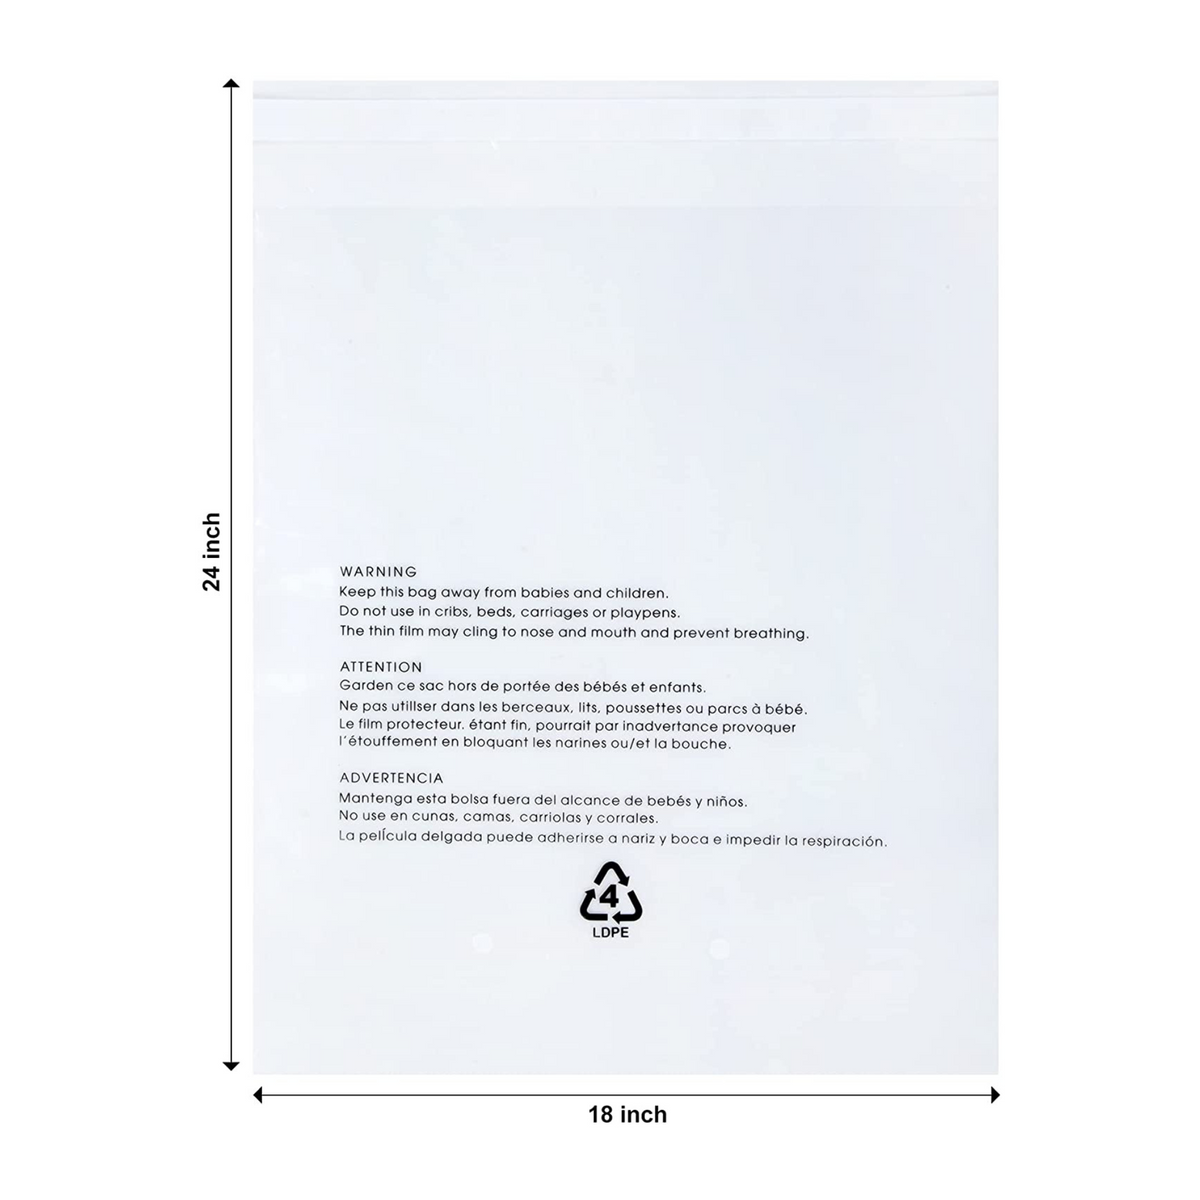 18x24 Industrial Clear Plastic Poly Bags With Permanent Self Seal - 1.5 Mil Suffocation Warning Bags For Packaging, Shipping & FBA - 200 Pcs - Infinite Pack